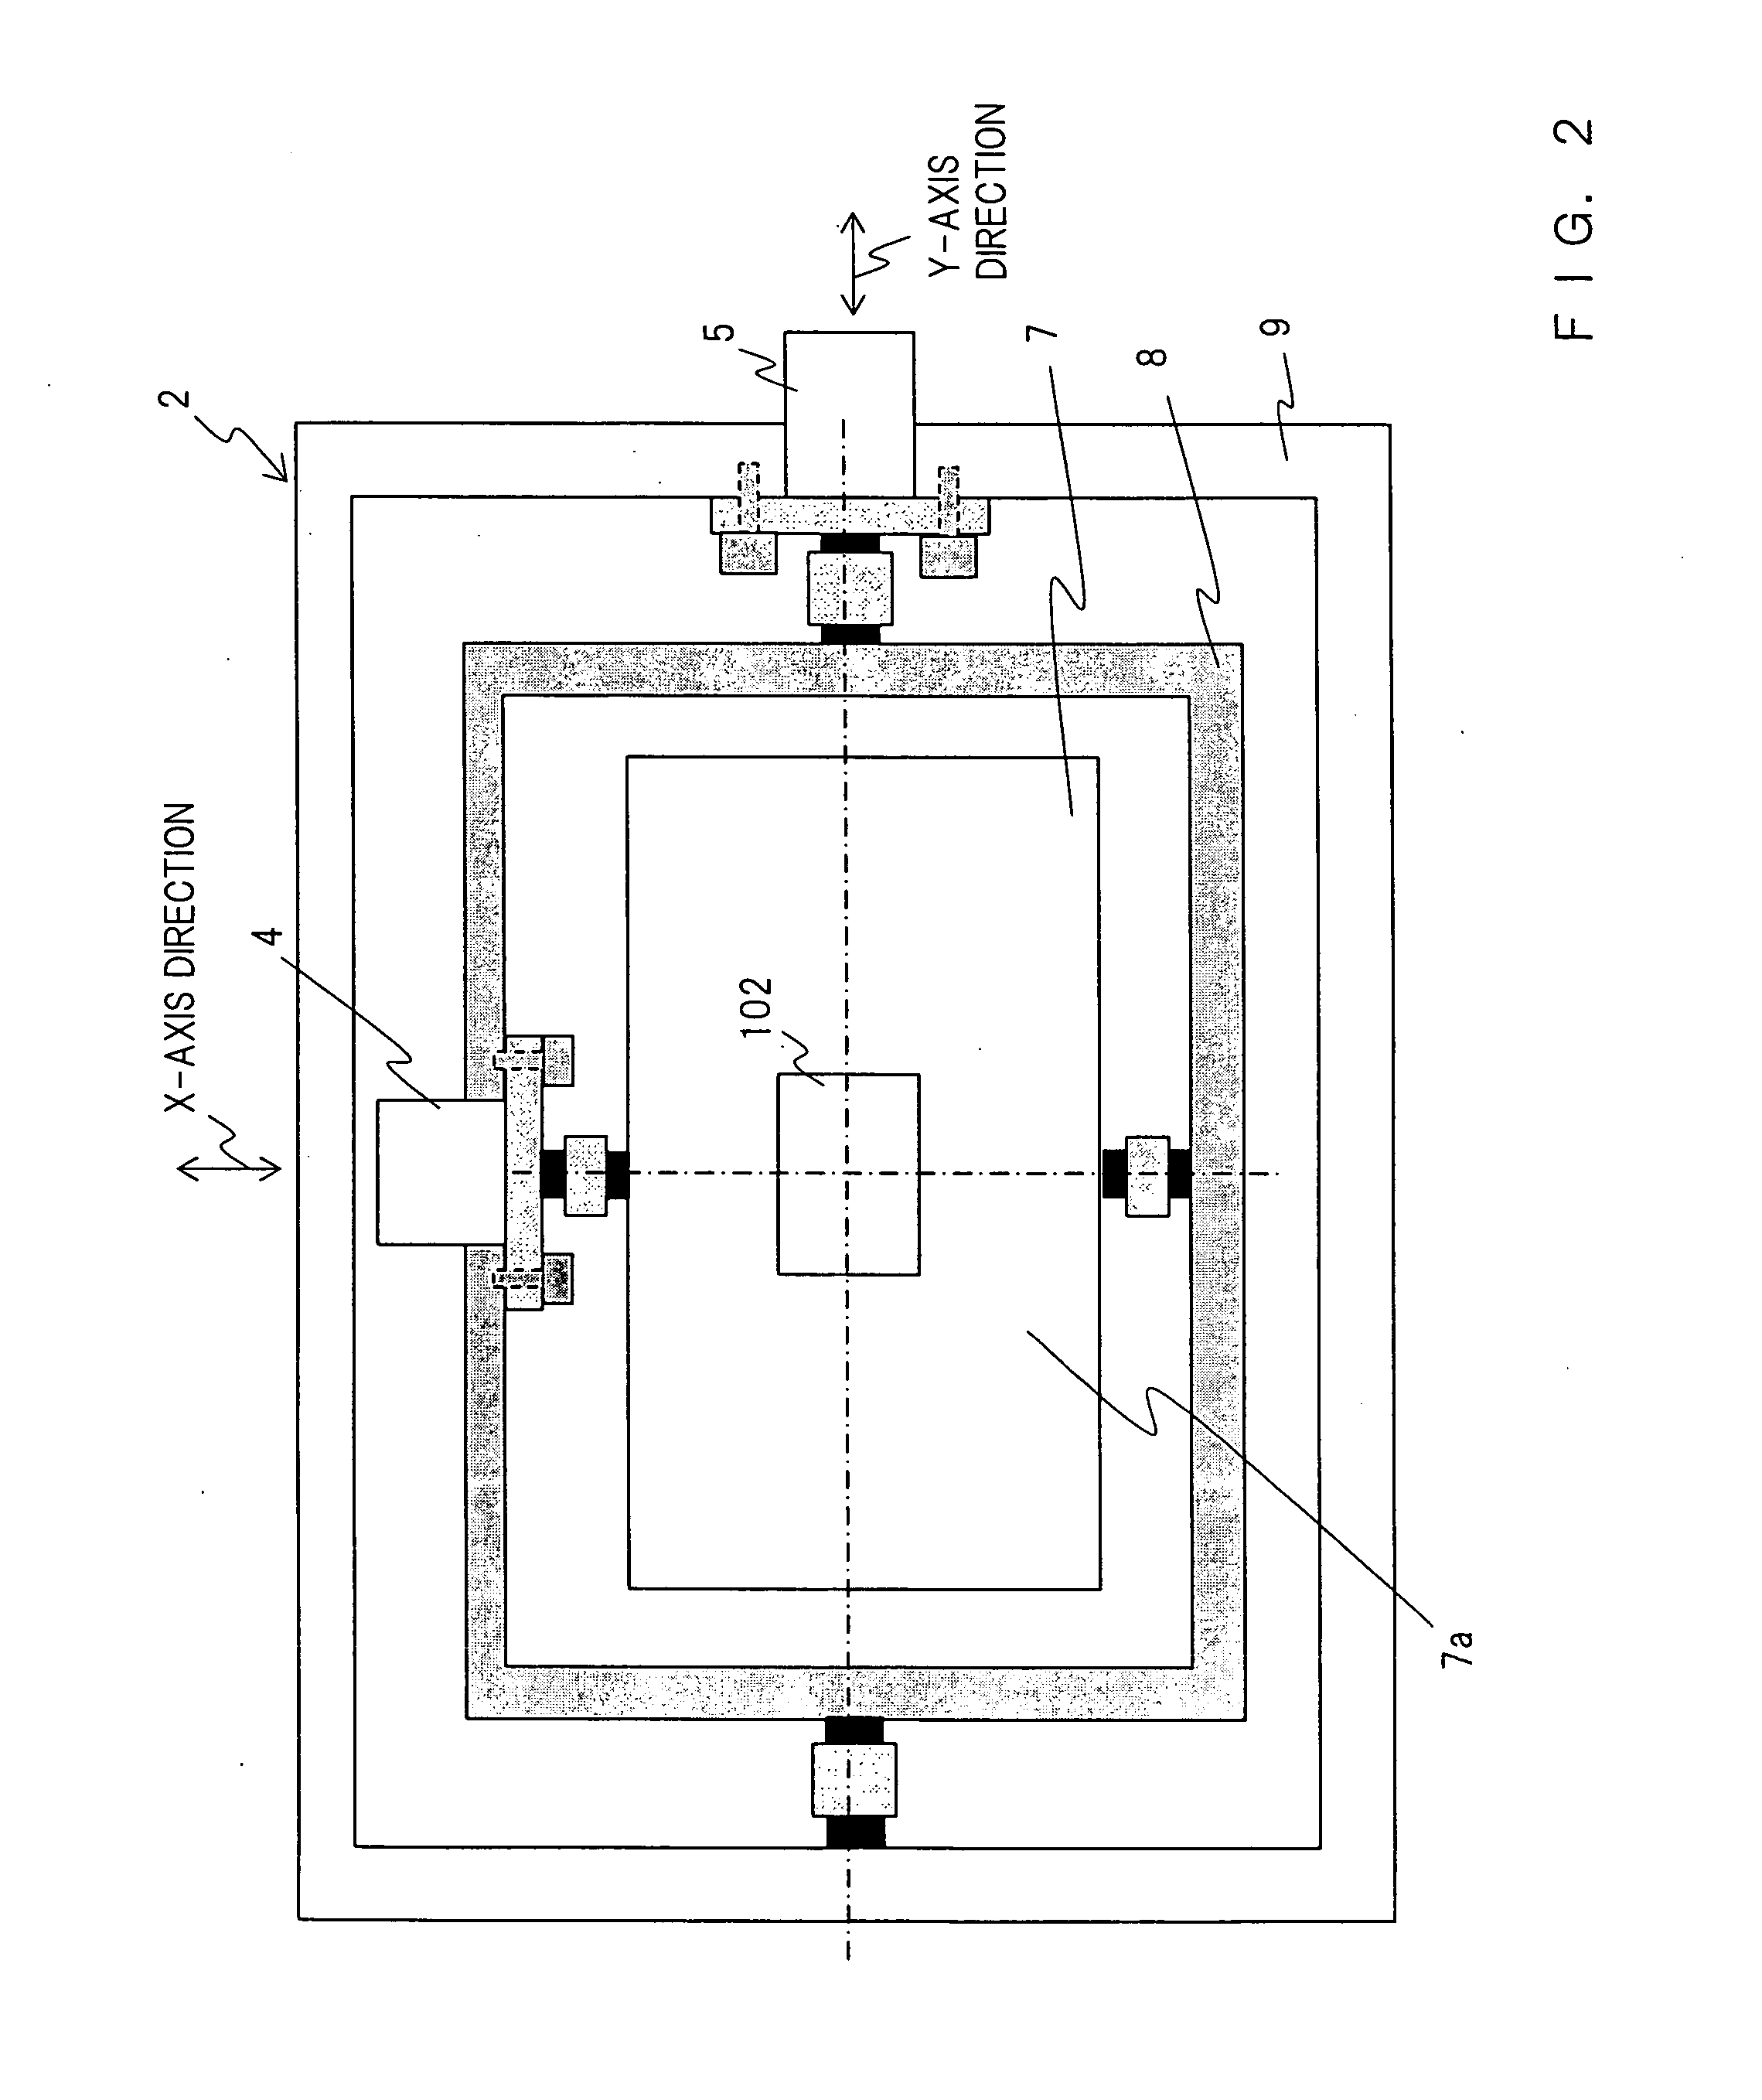 X-ray inspection apparatus and X-ray inspection method